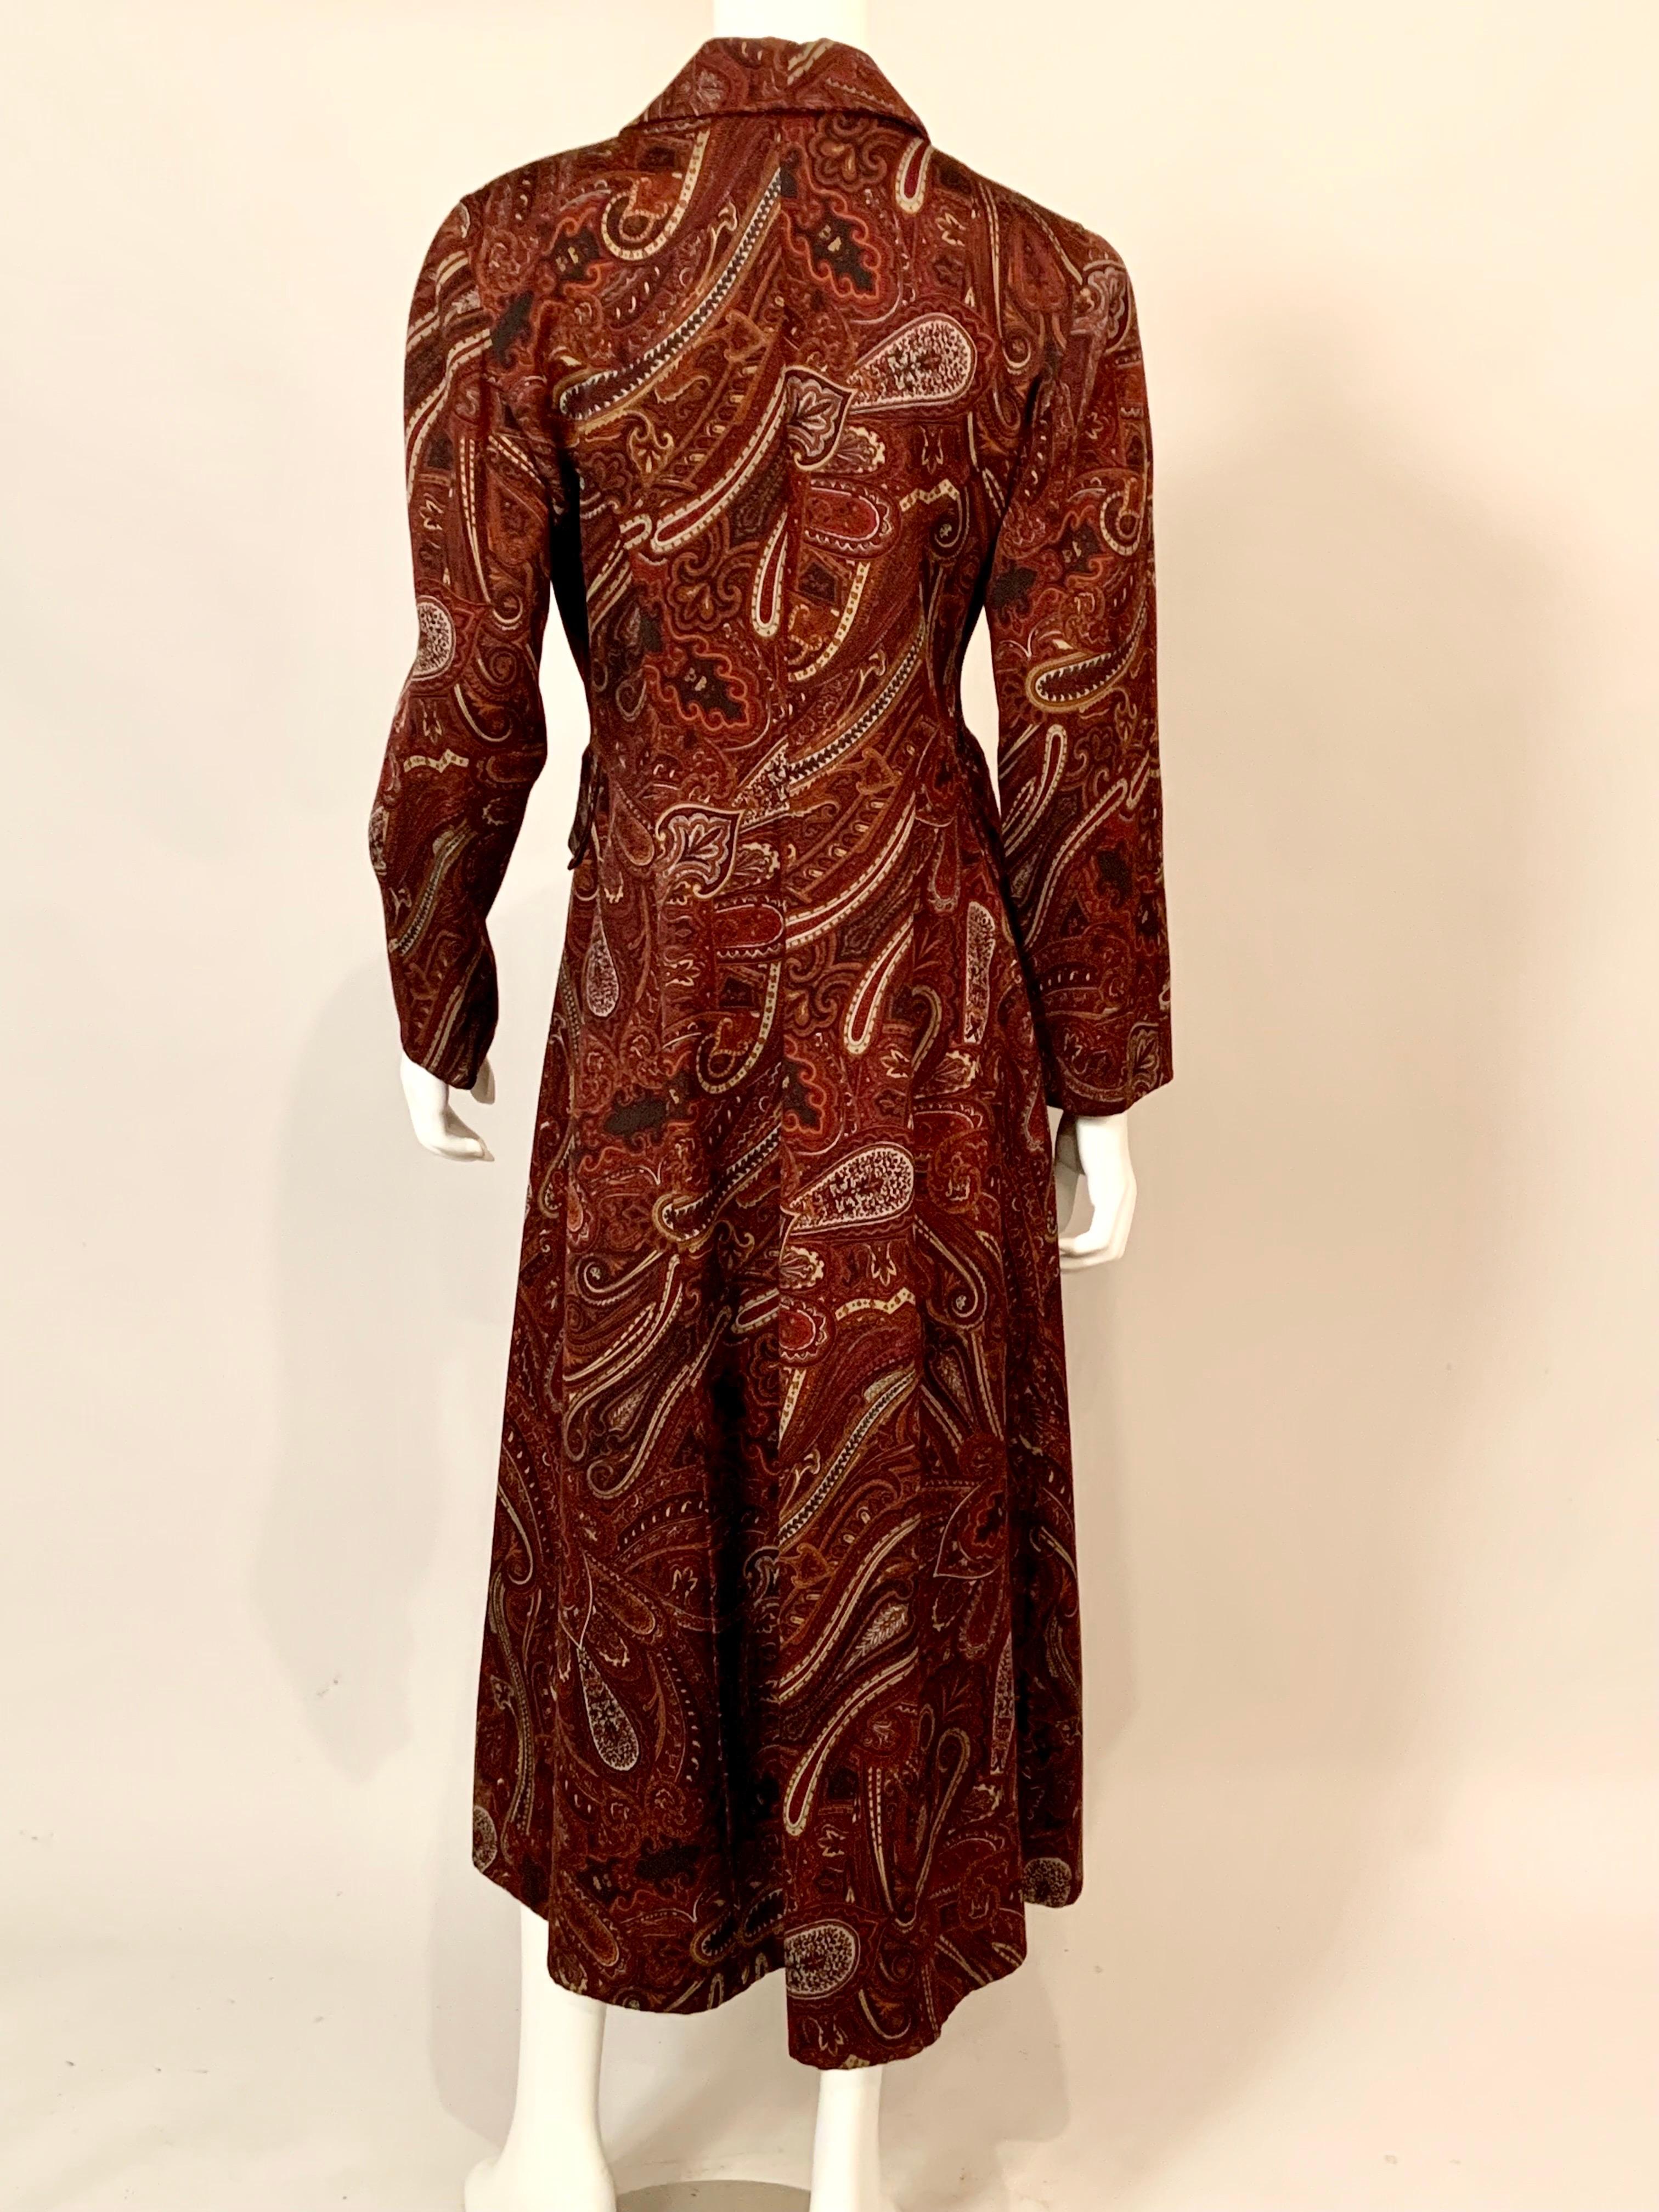 Bill Blass Paisley Patterned Coat in a Larger Size For Sale 3